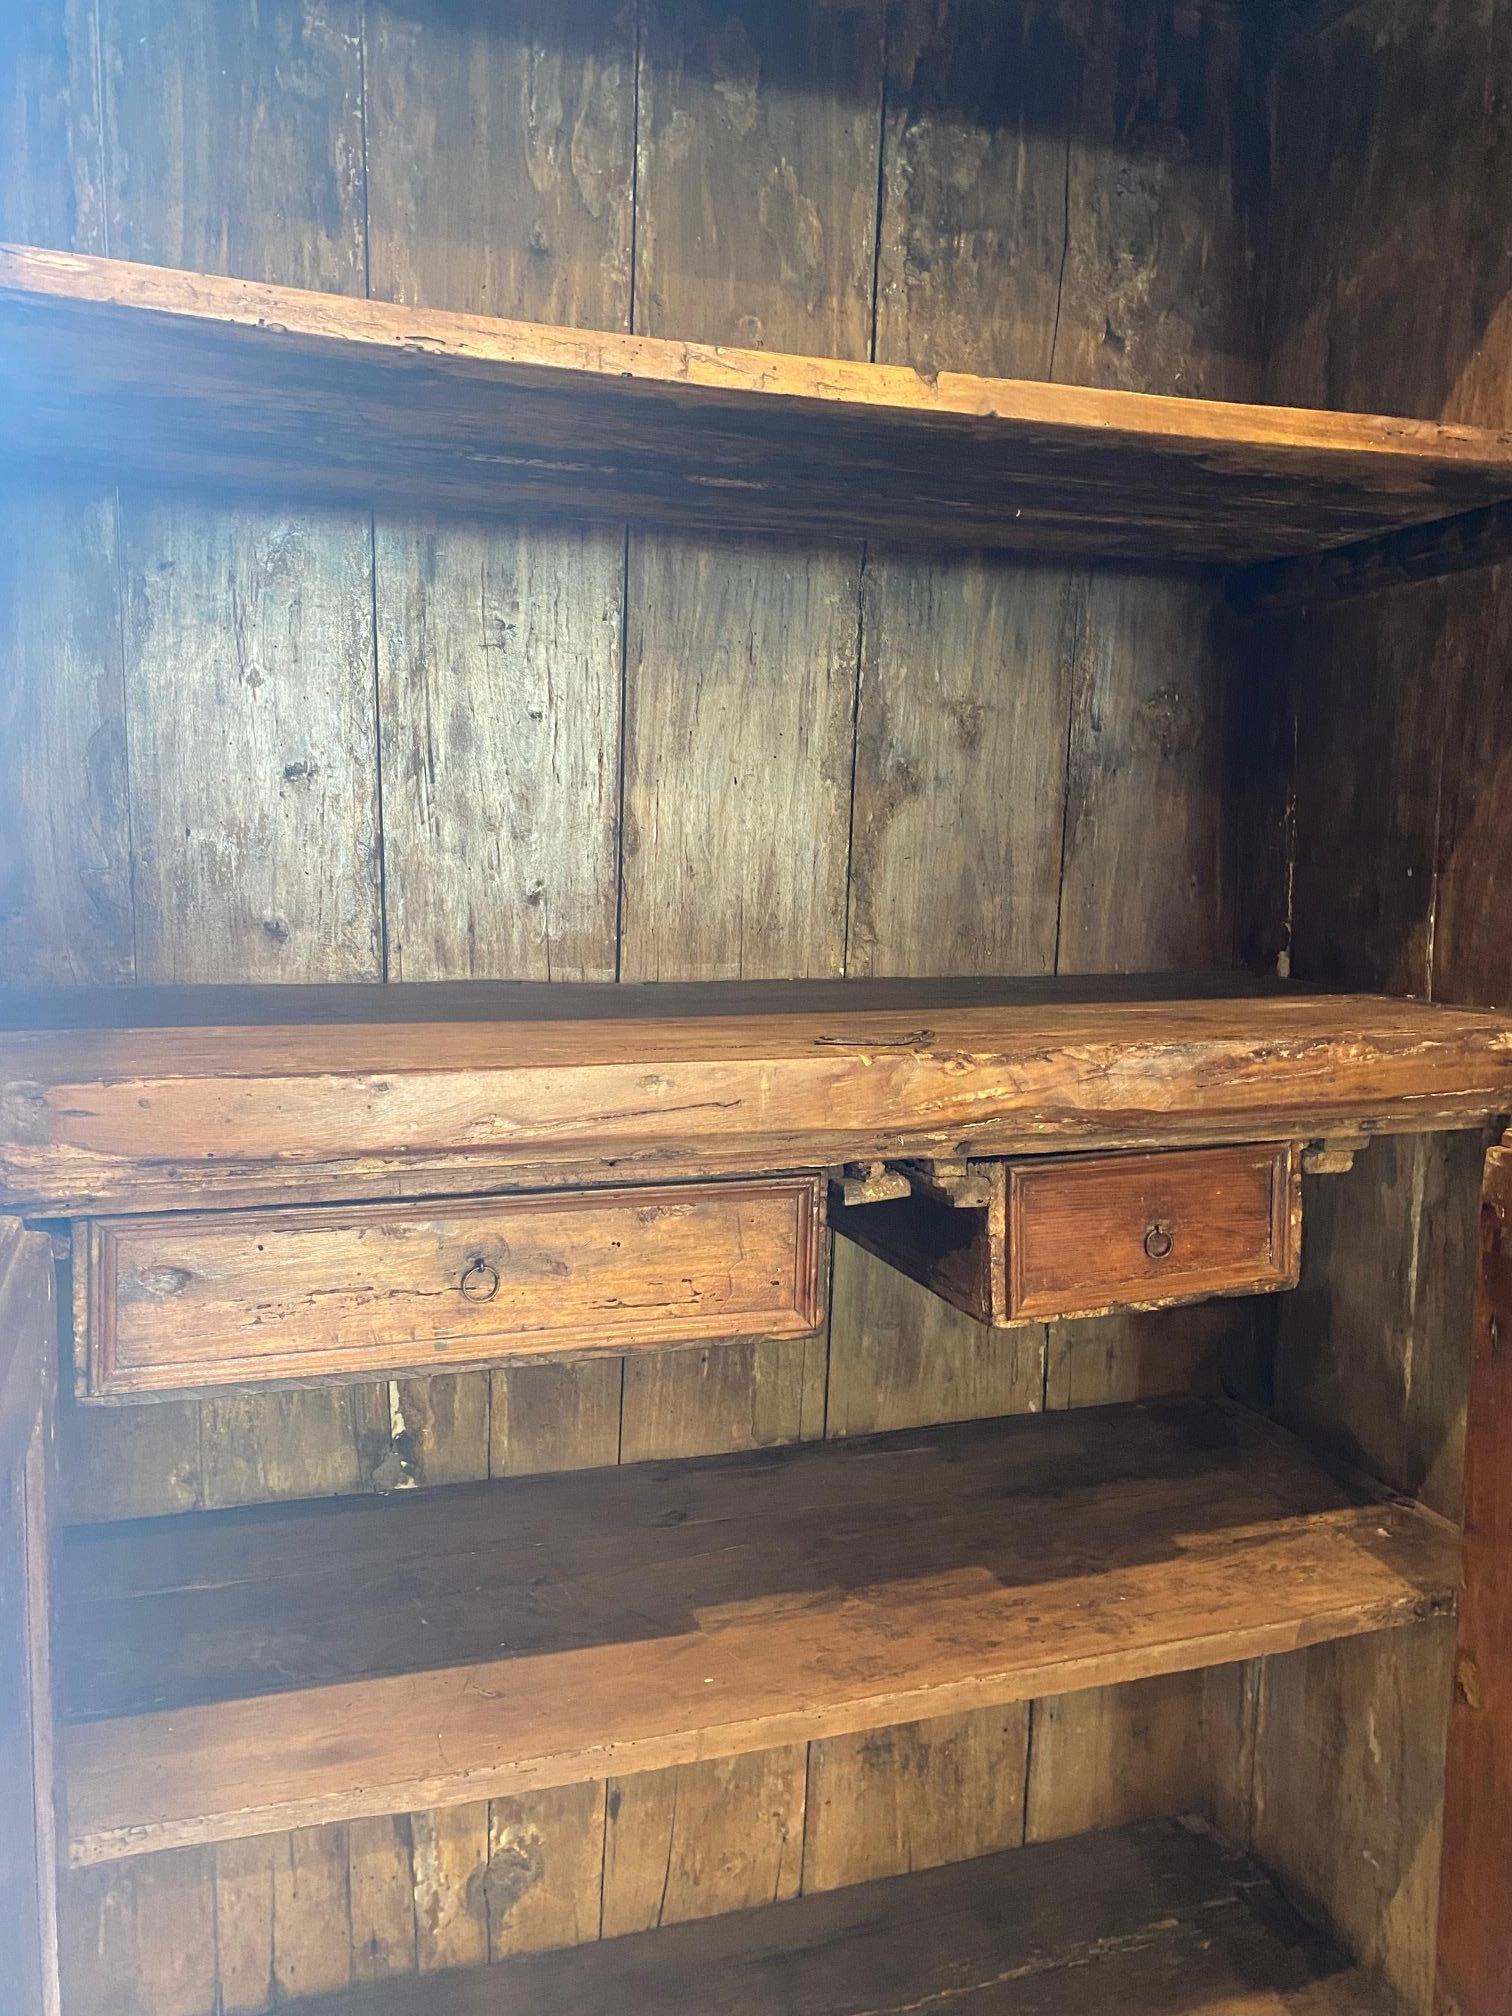 19th century ebonized two-door pine cabinet.  Interior has two lower doors concealing two drawers with exposed upper fixed shelves.  Exterior doors have locks with keys.  Original painted surface has worn through areas on surface while the interior